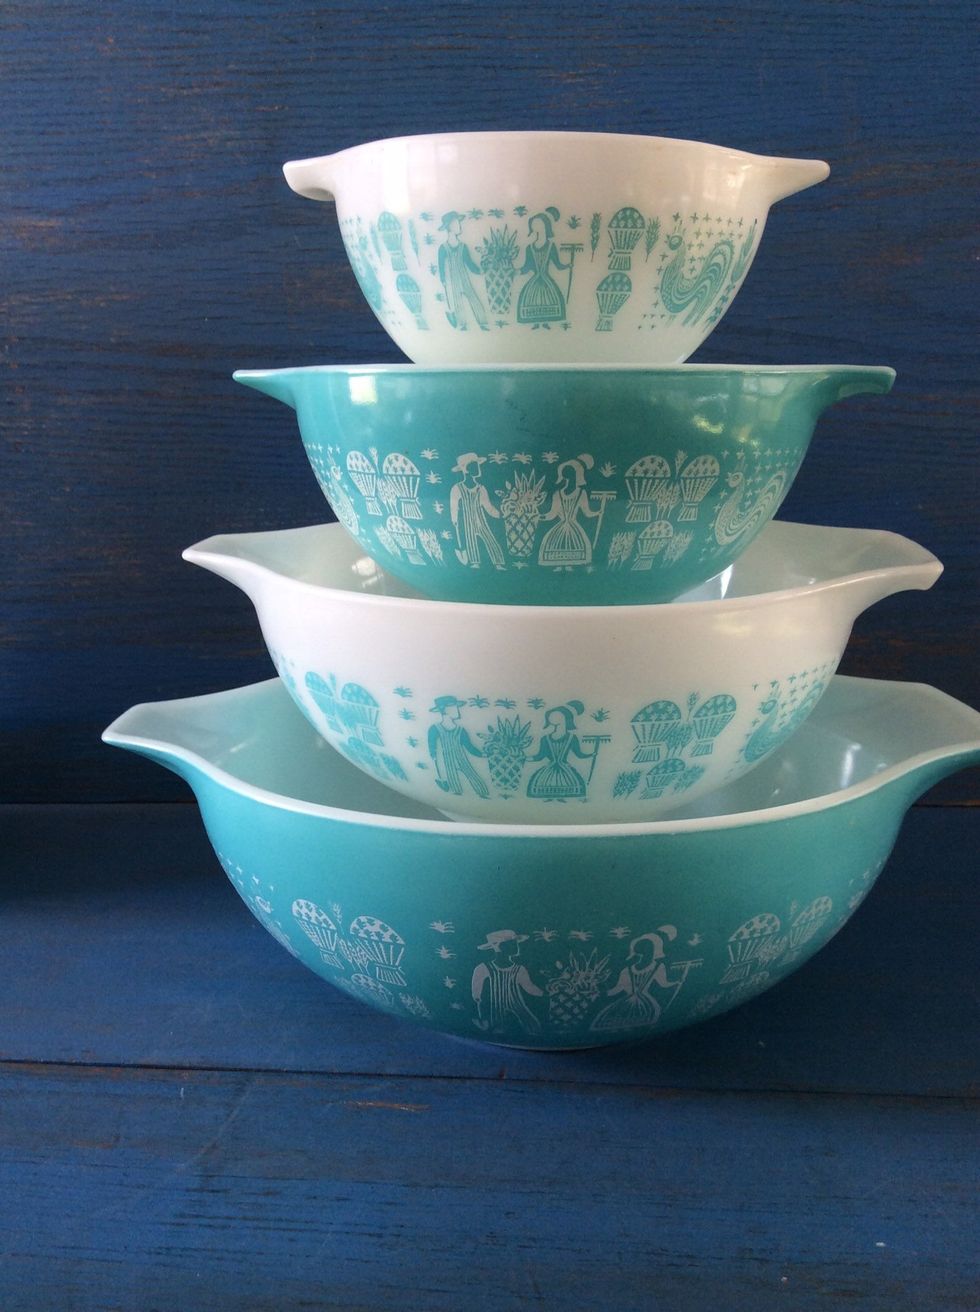 Don't Throw Out Grandma's Pyrex—Those Dishes Are Worth Real Money